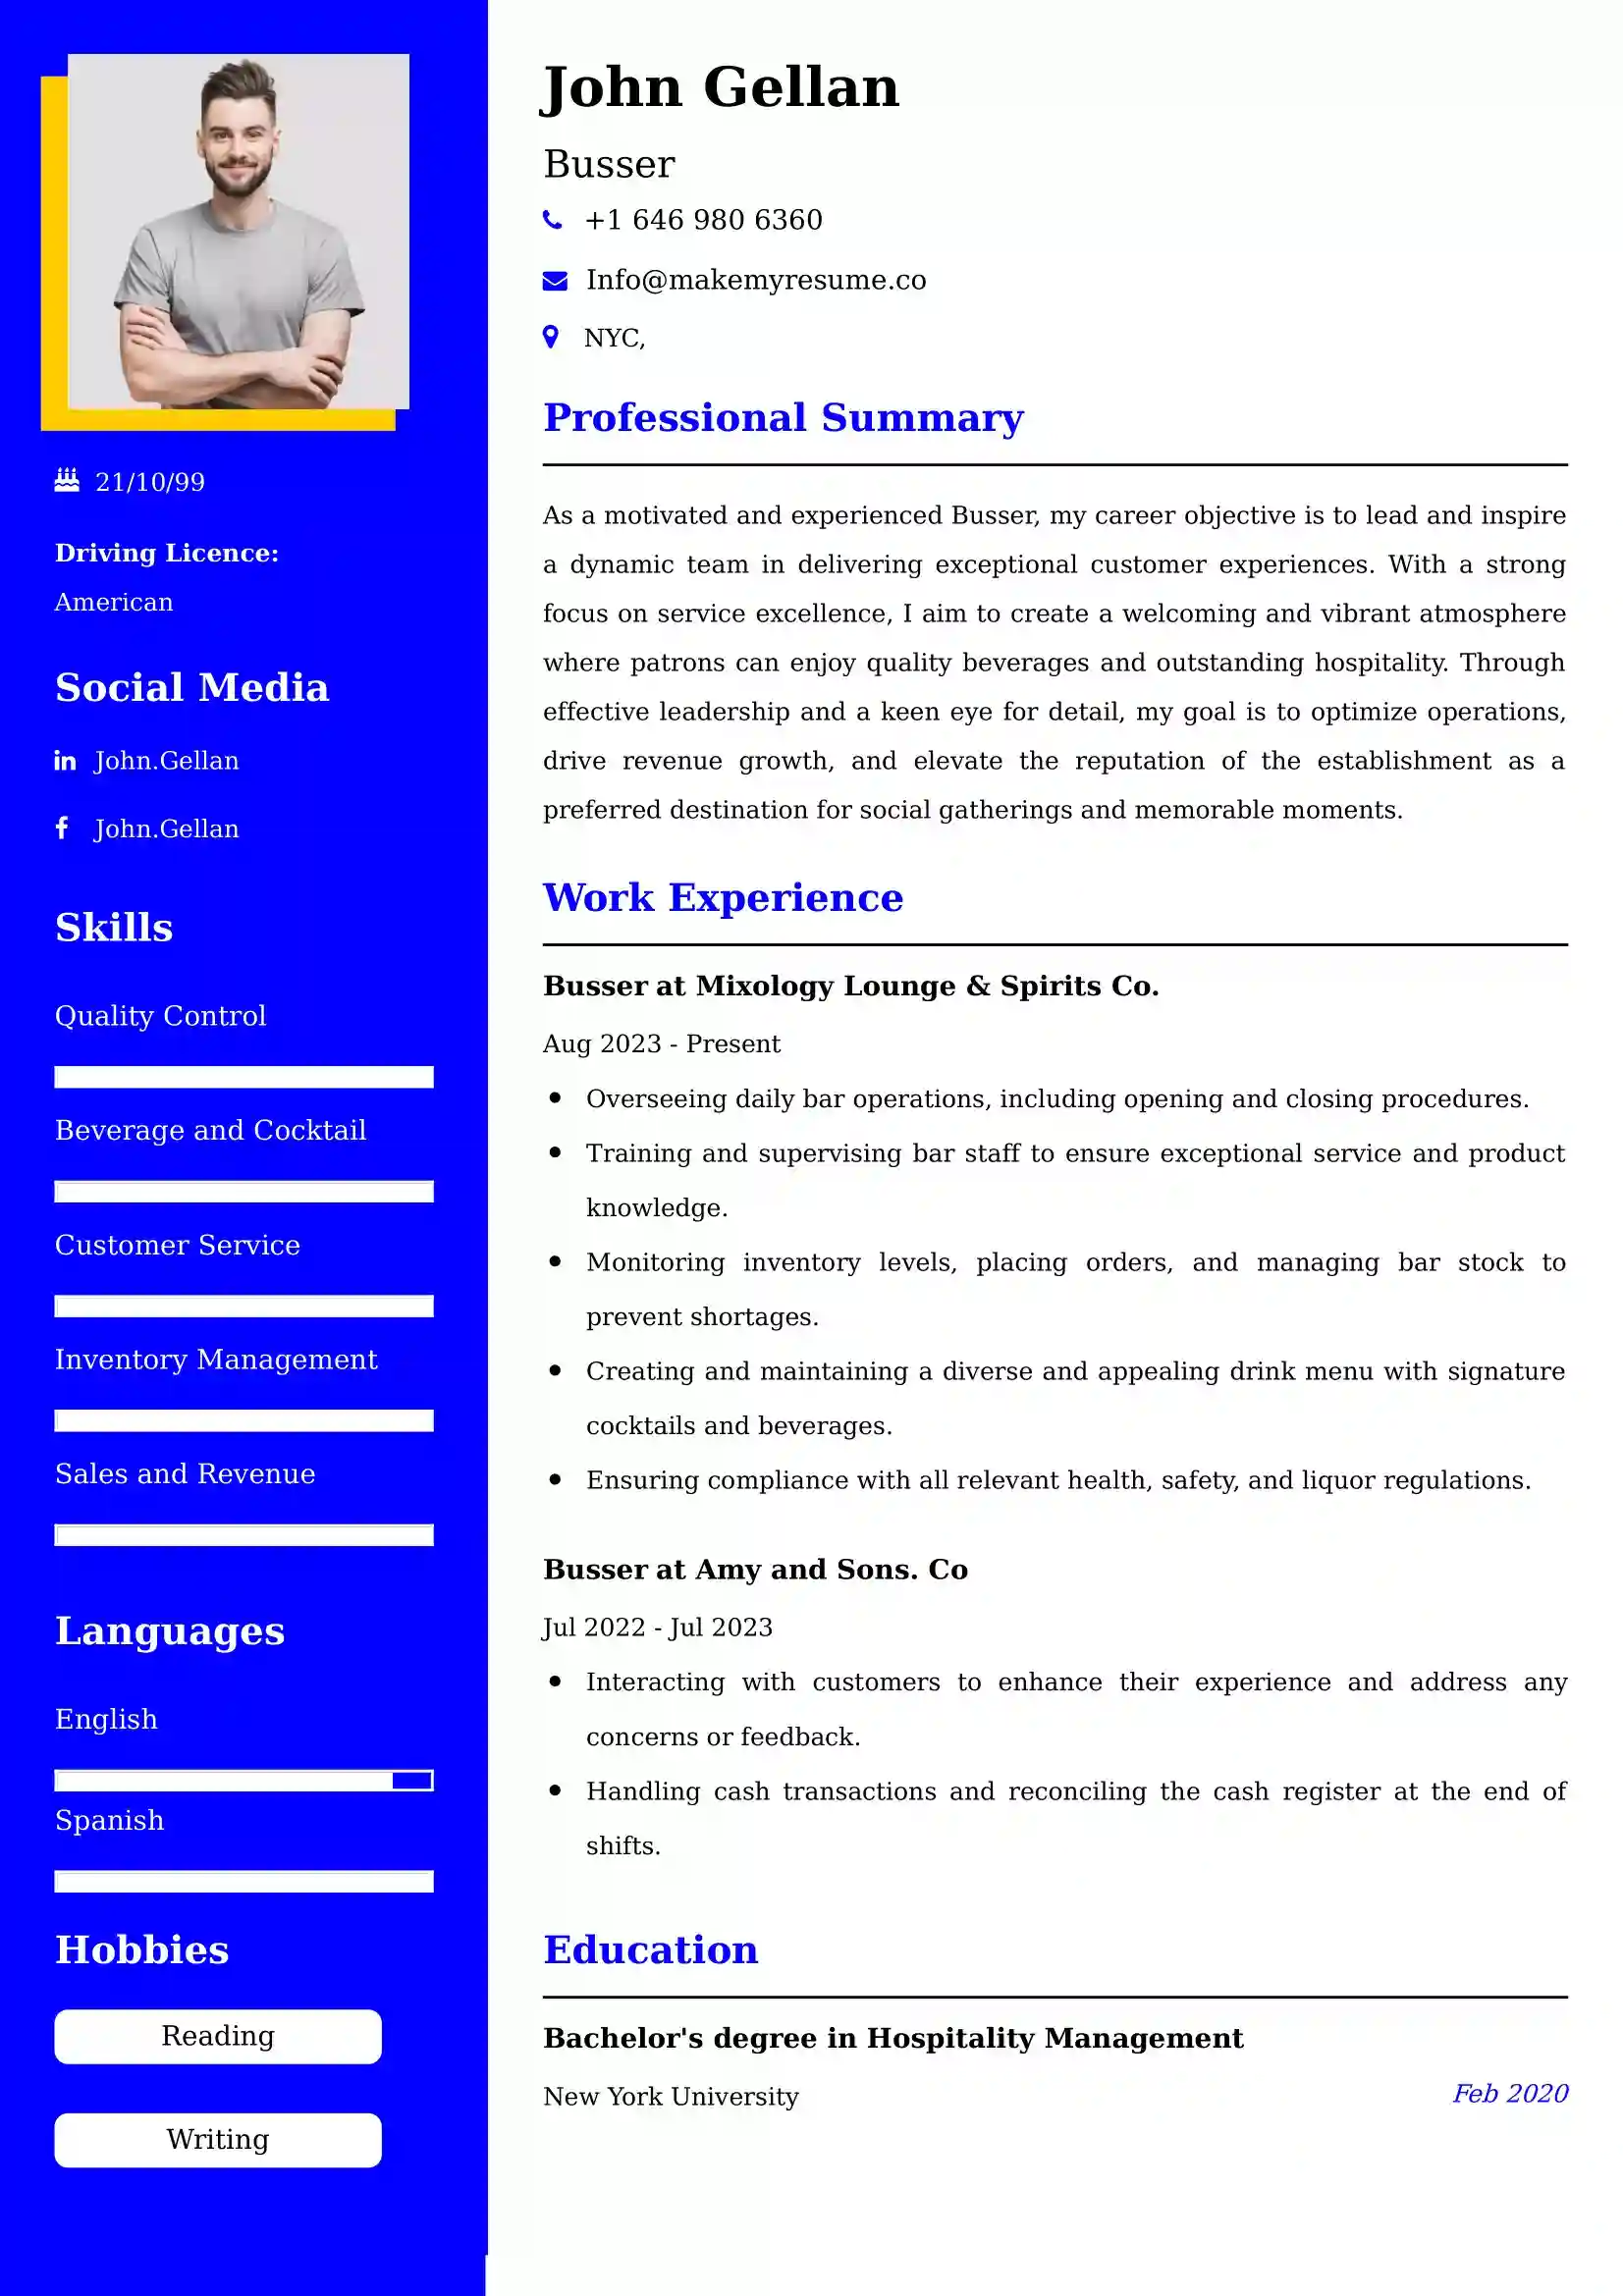 Busser Resume Examples - Australian Format and Tips